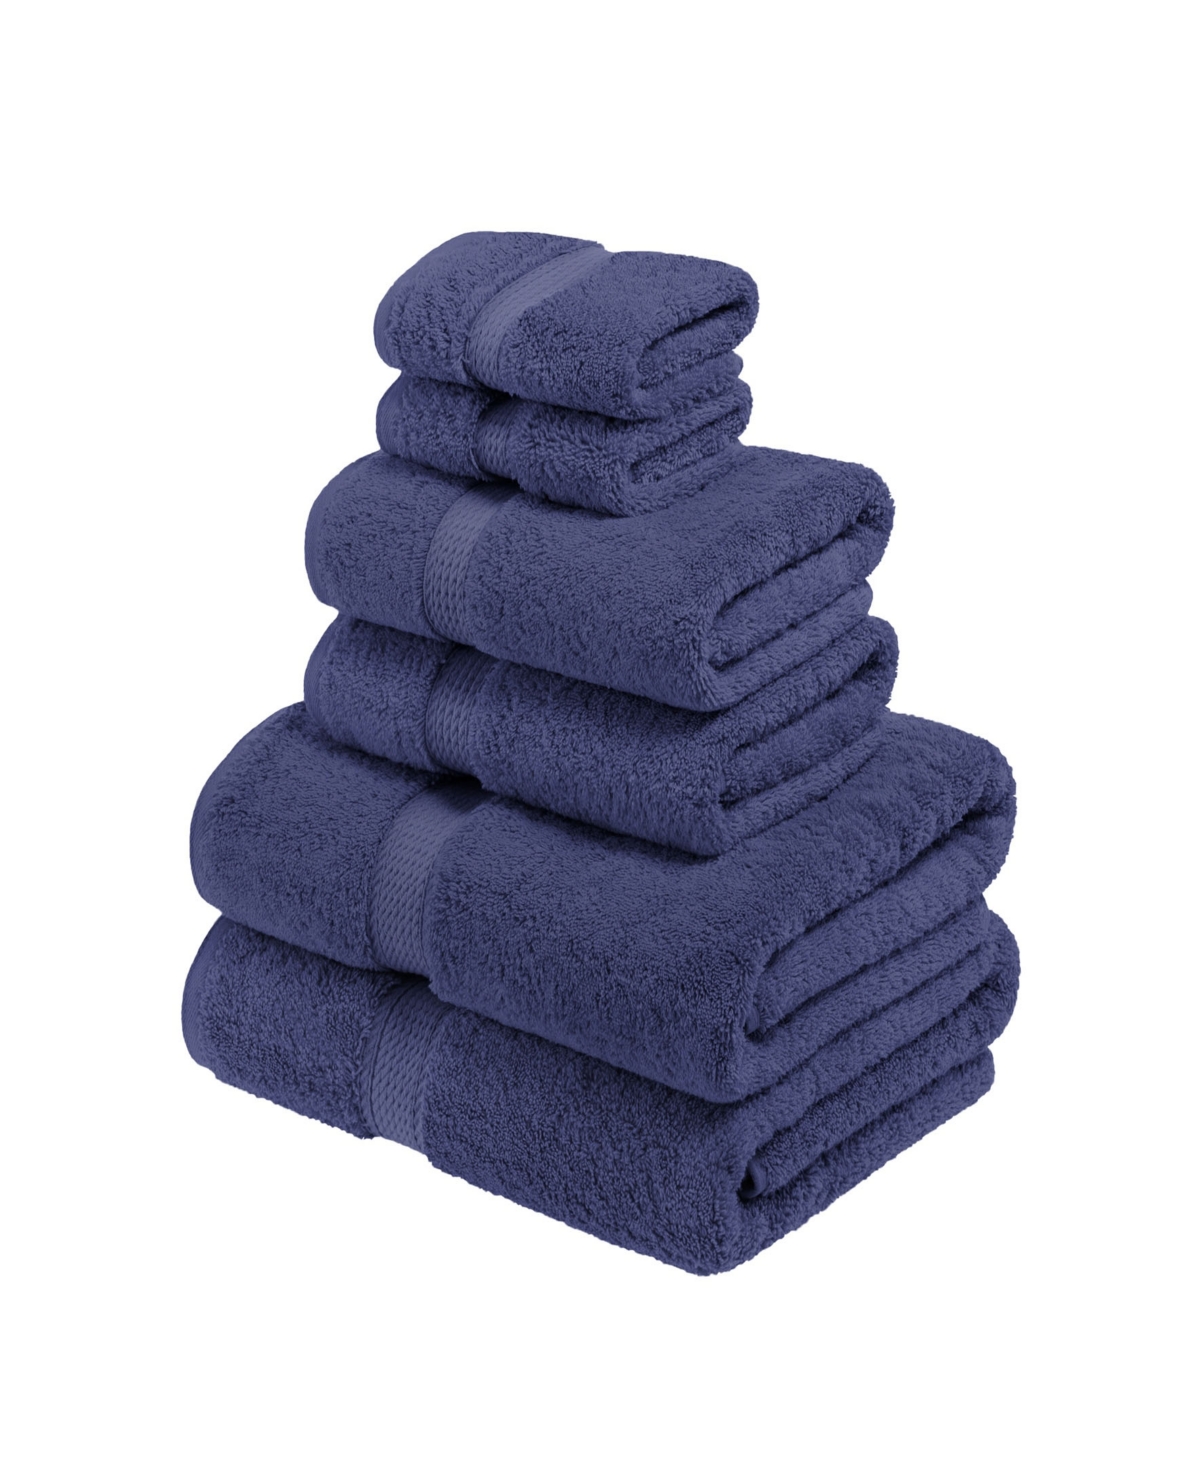 Superior Highly Absorbent 6 Piece Egyptian Cotton Ultra Plush Solid Assorted Bath Towel Set Bedding In Navy Blue